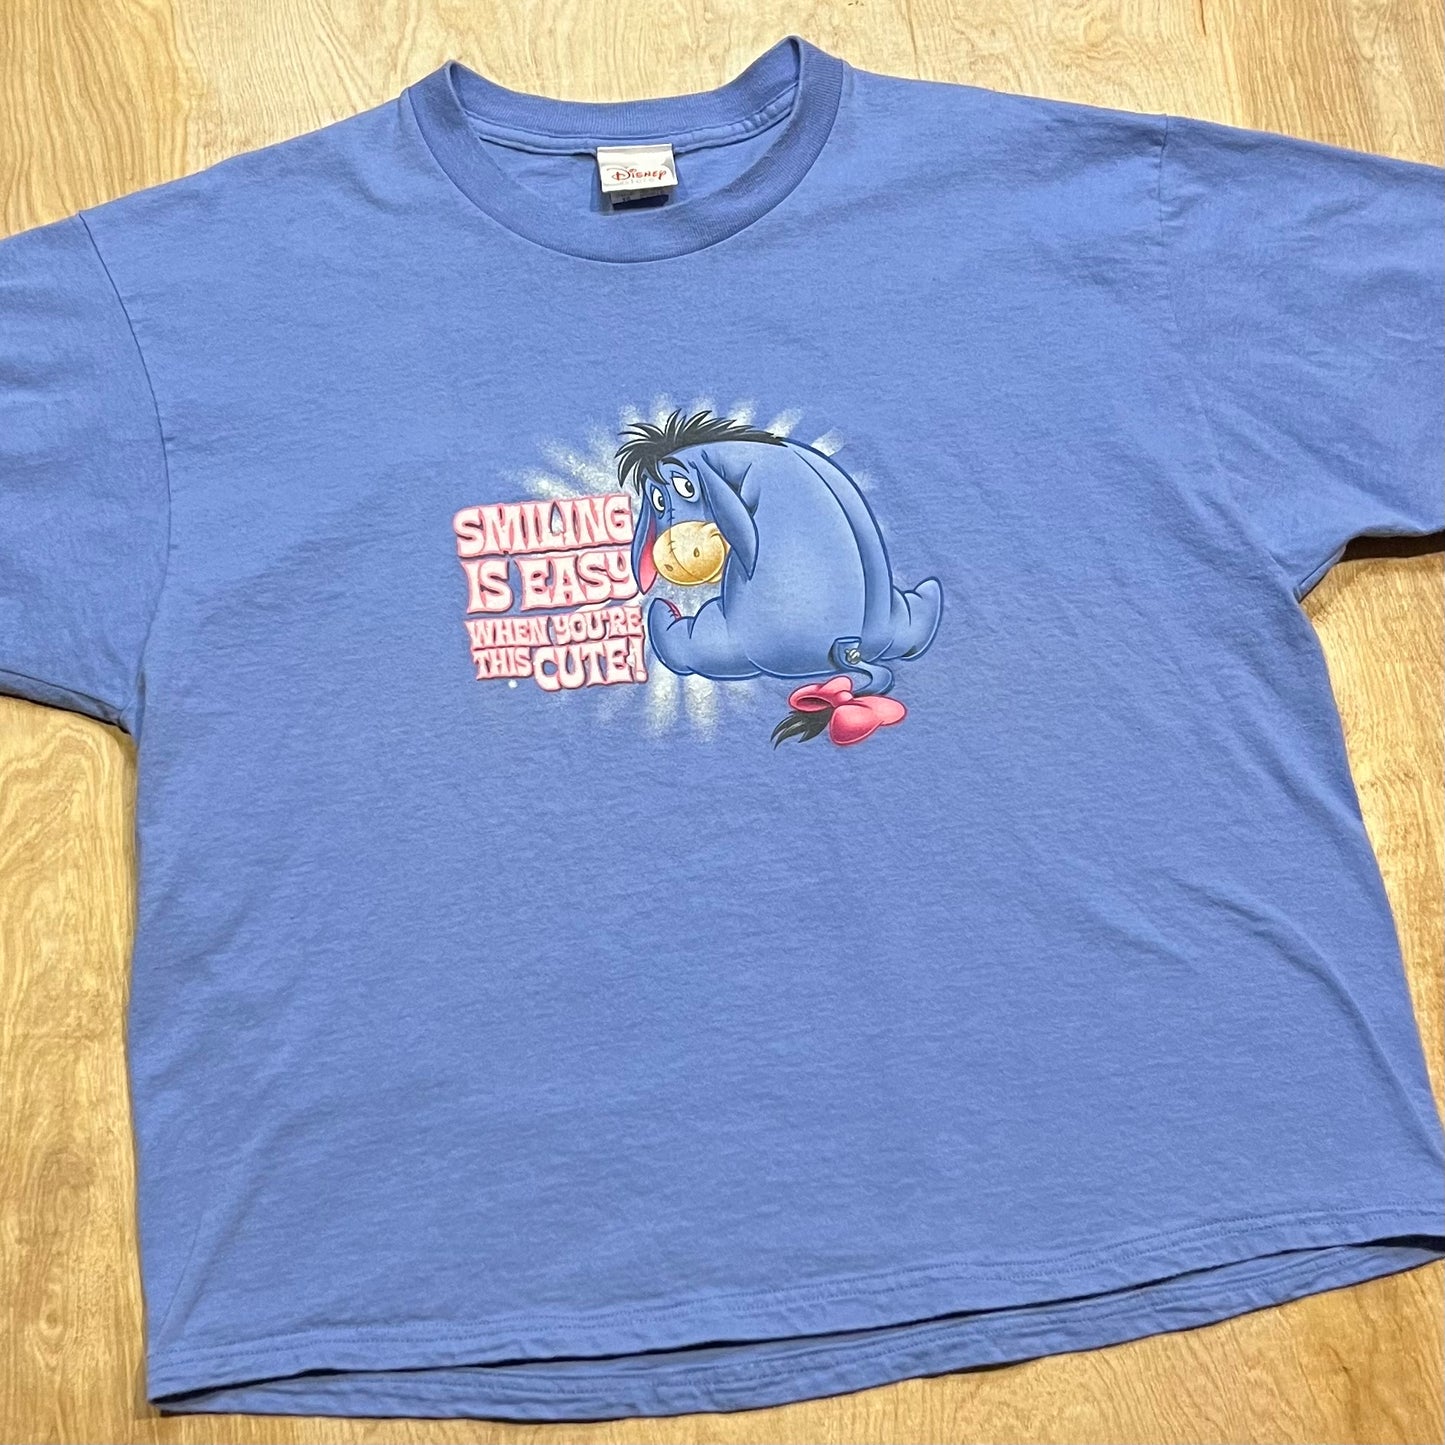 Classic Disney "Smiling Isn't Easy When You're This Cute" T-Shirt